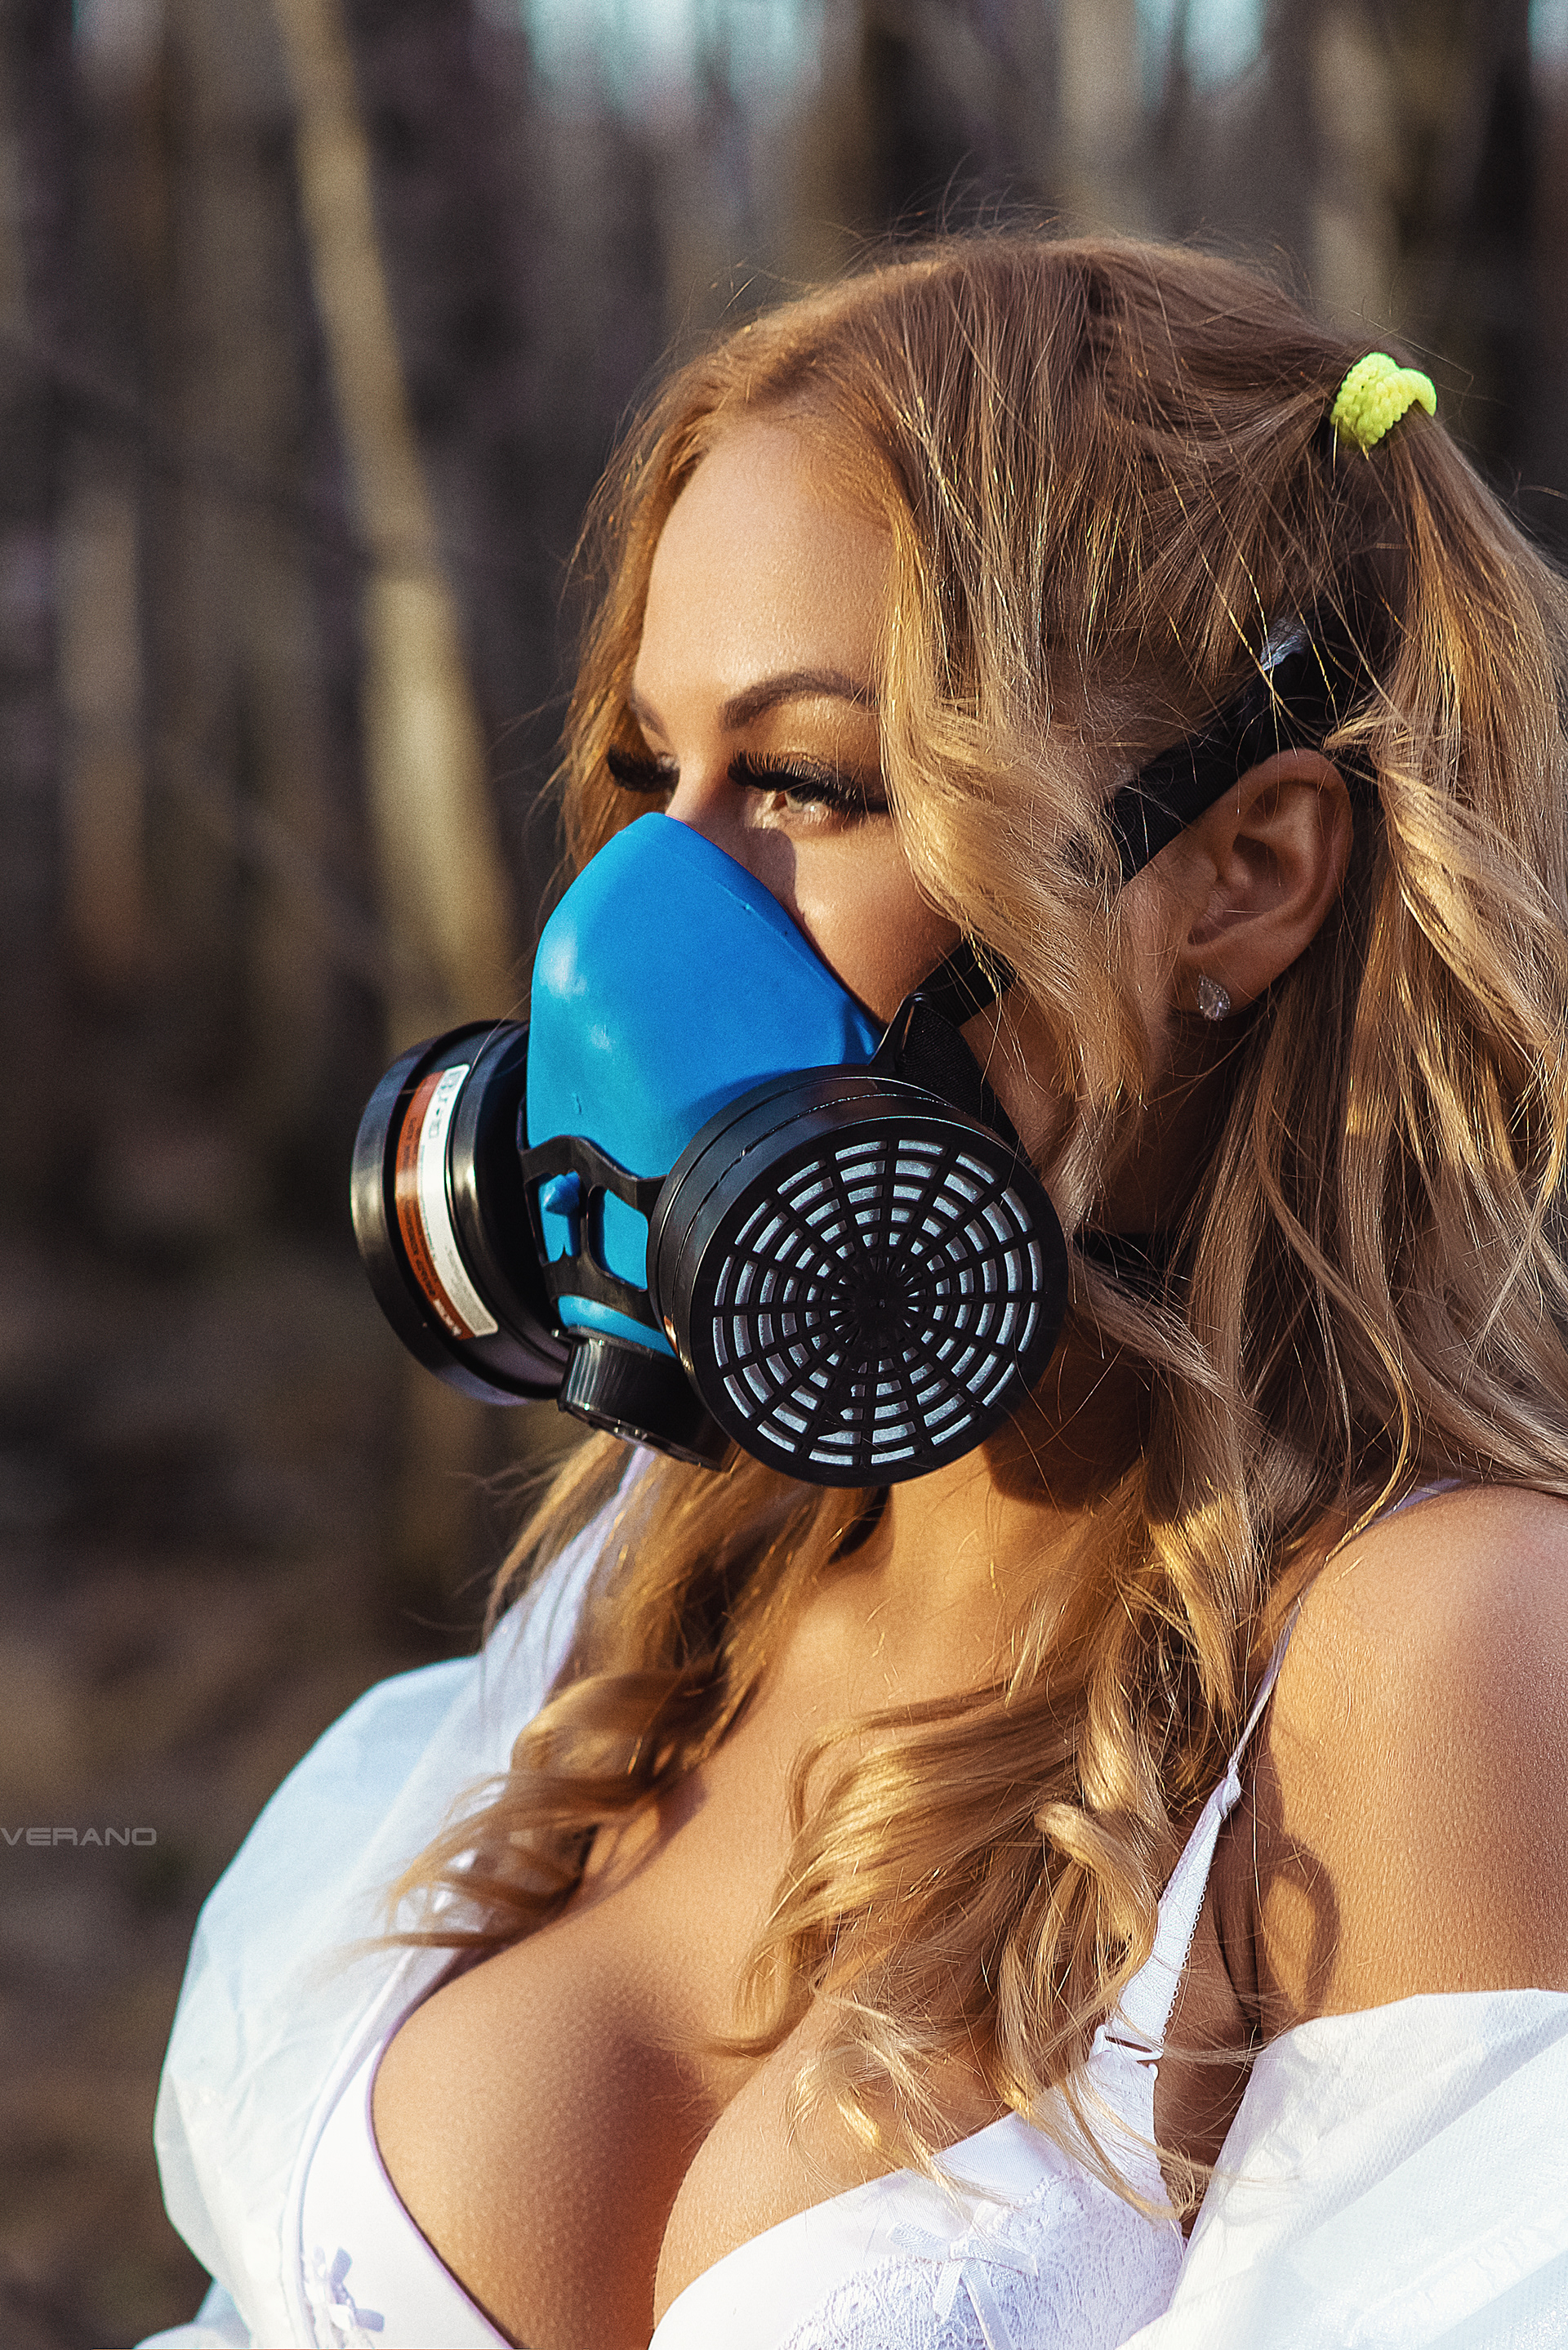 People 1920x2877 Nikolas Verano women blonde long hair wavy hair twintails makeup looking away mask gas masks lingerie bra open clothes forest goosebumps women outdoors cleavage